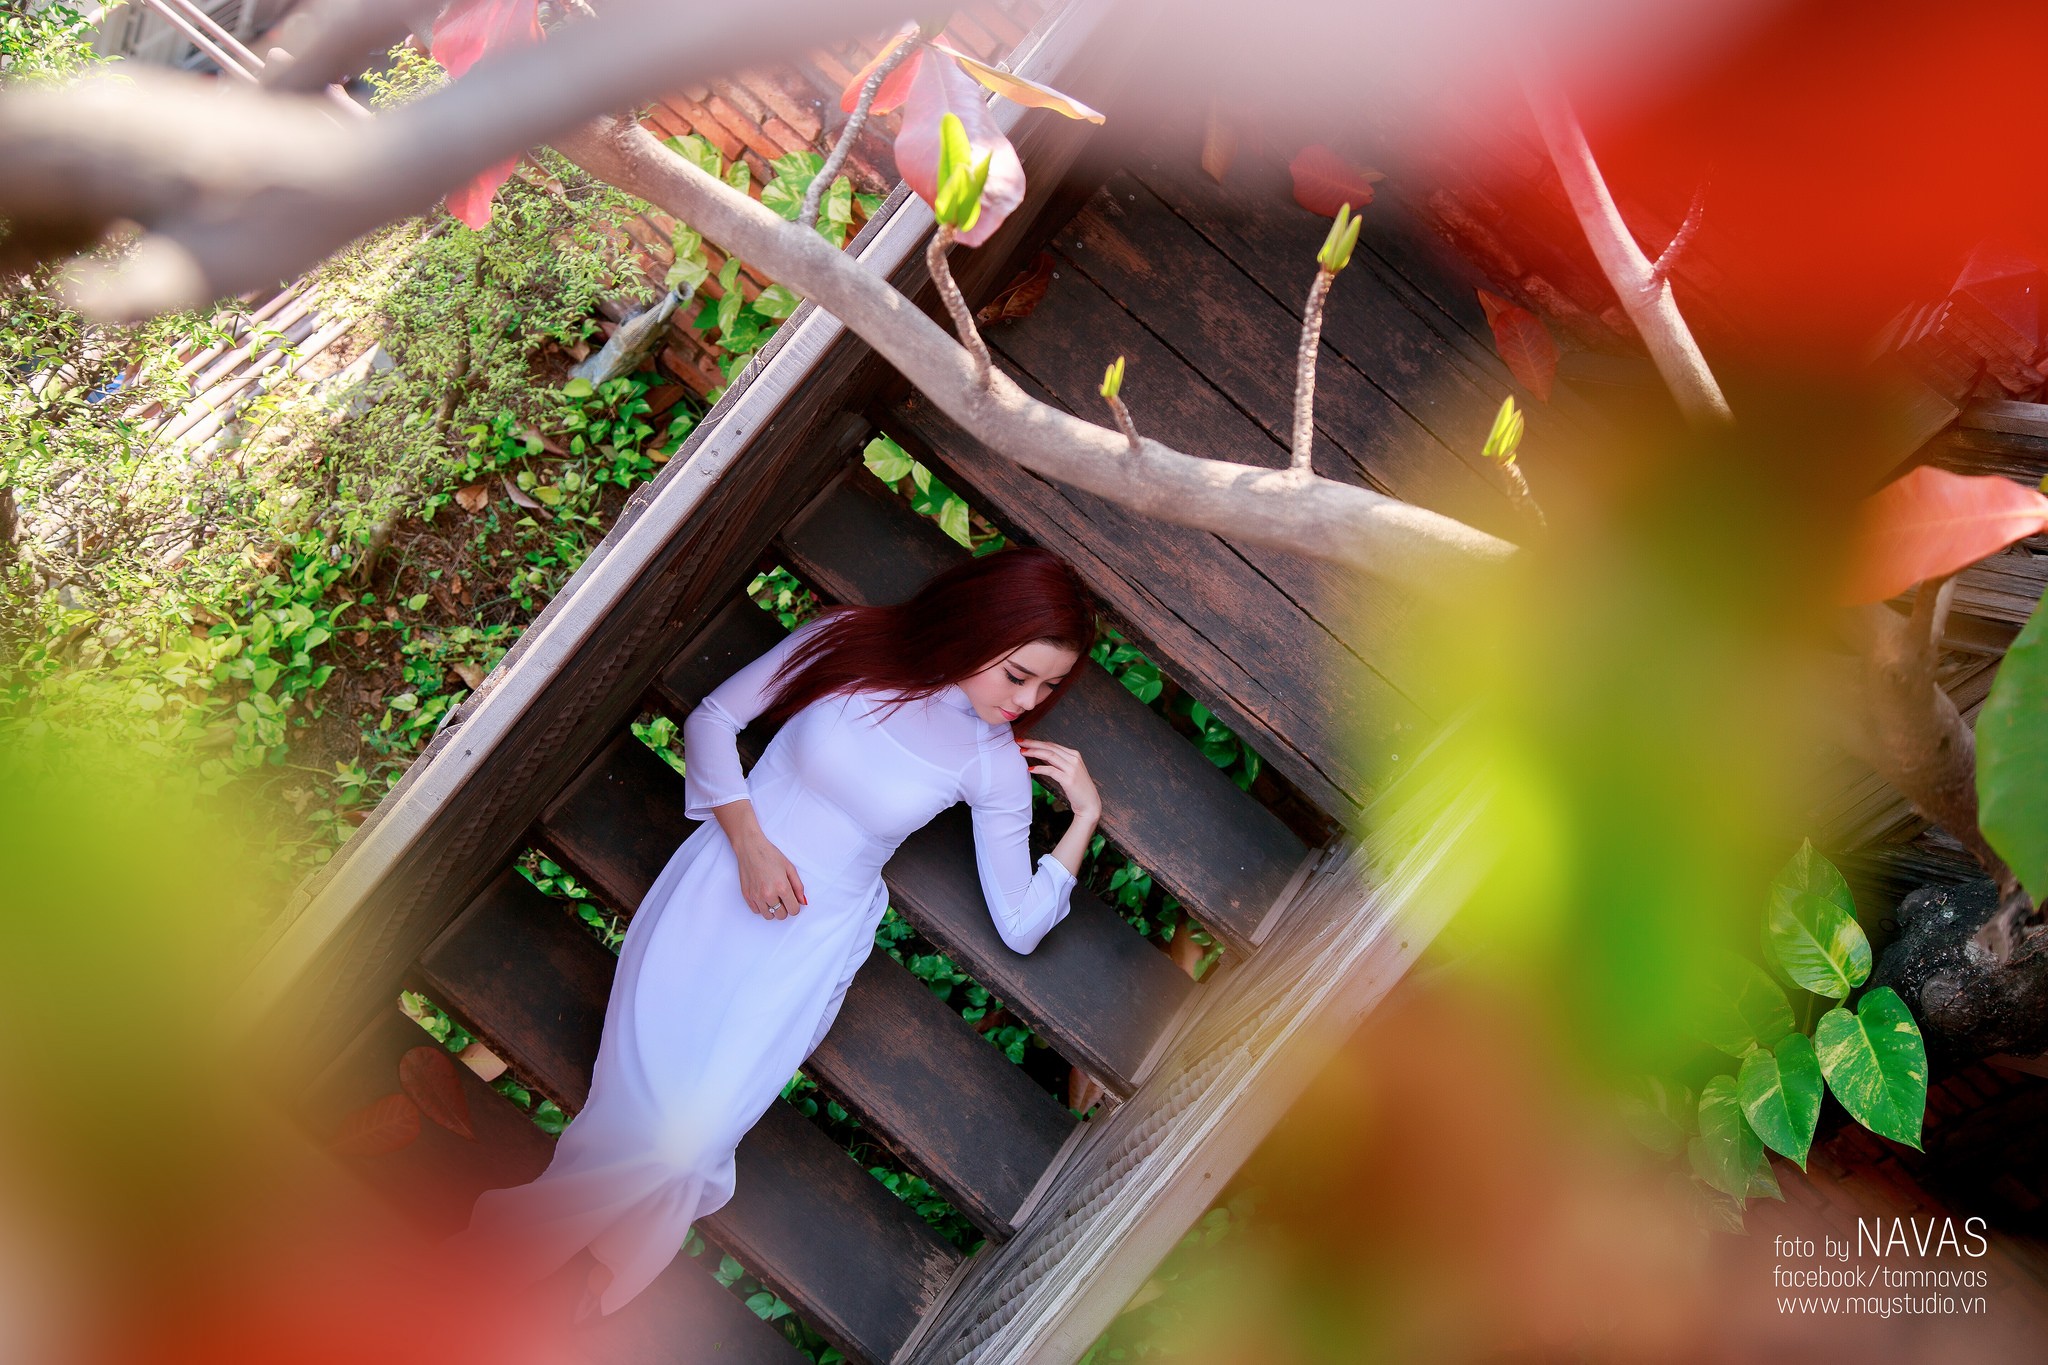 People 2048x1365 women Asian redhead white dress women outdoors top view model dyed hair dress white clothing red nails garden plants stairs Vietnamese women